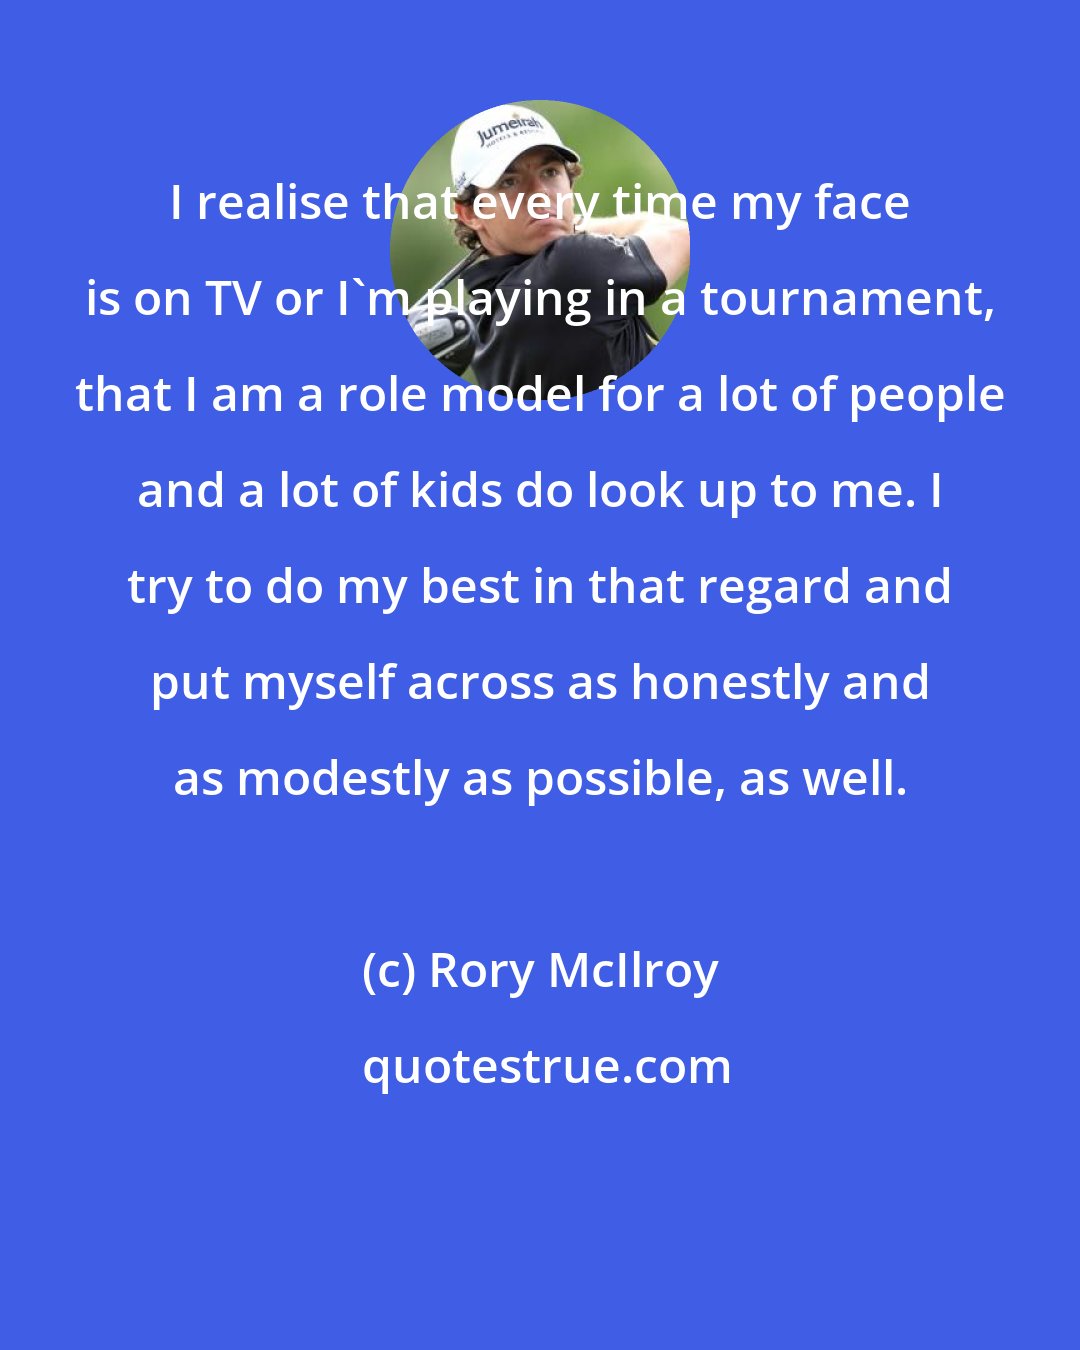 Rory McIlroy: I realise that every time my face is on TV or I'm playing in a tournament, that I am a role model for a lot of people and a lot of kids do look up to me. I try to do my best in that regard and put myself across as honestly and as modestly as possible, as well.